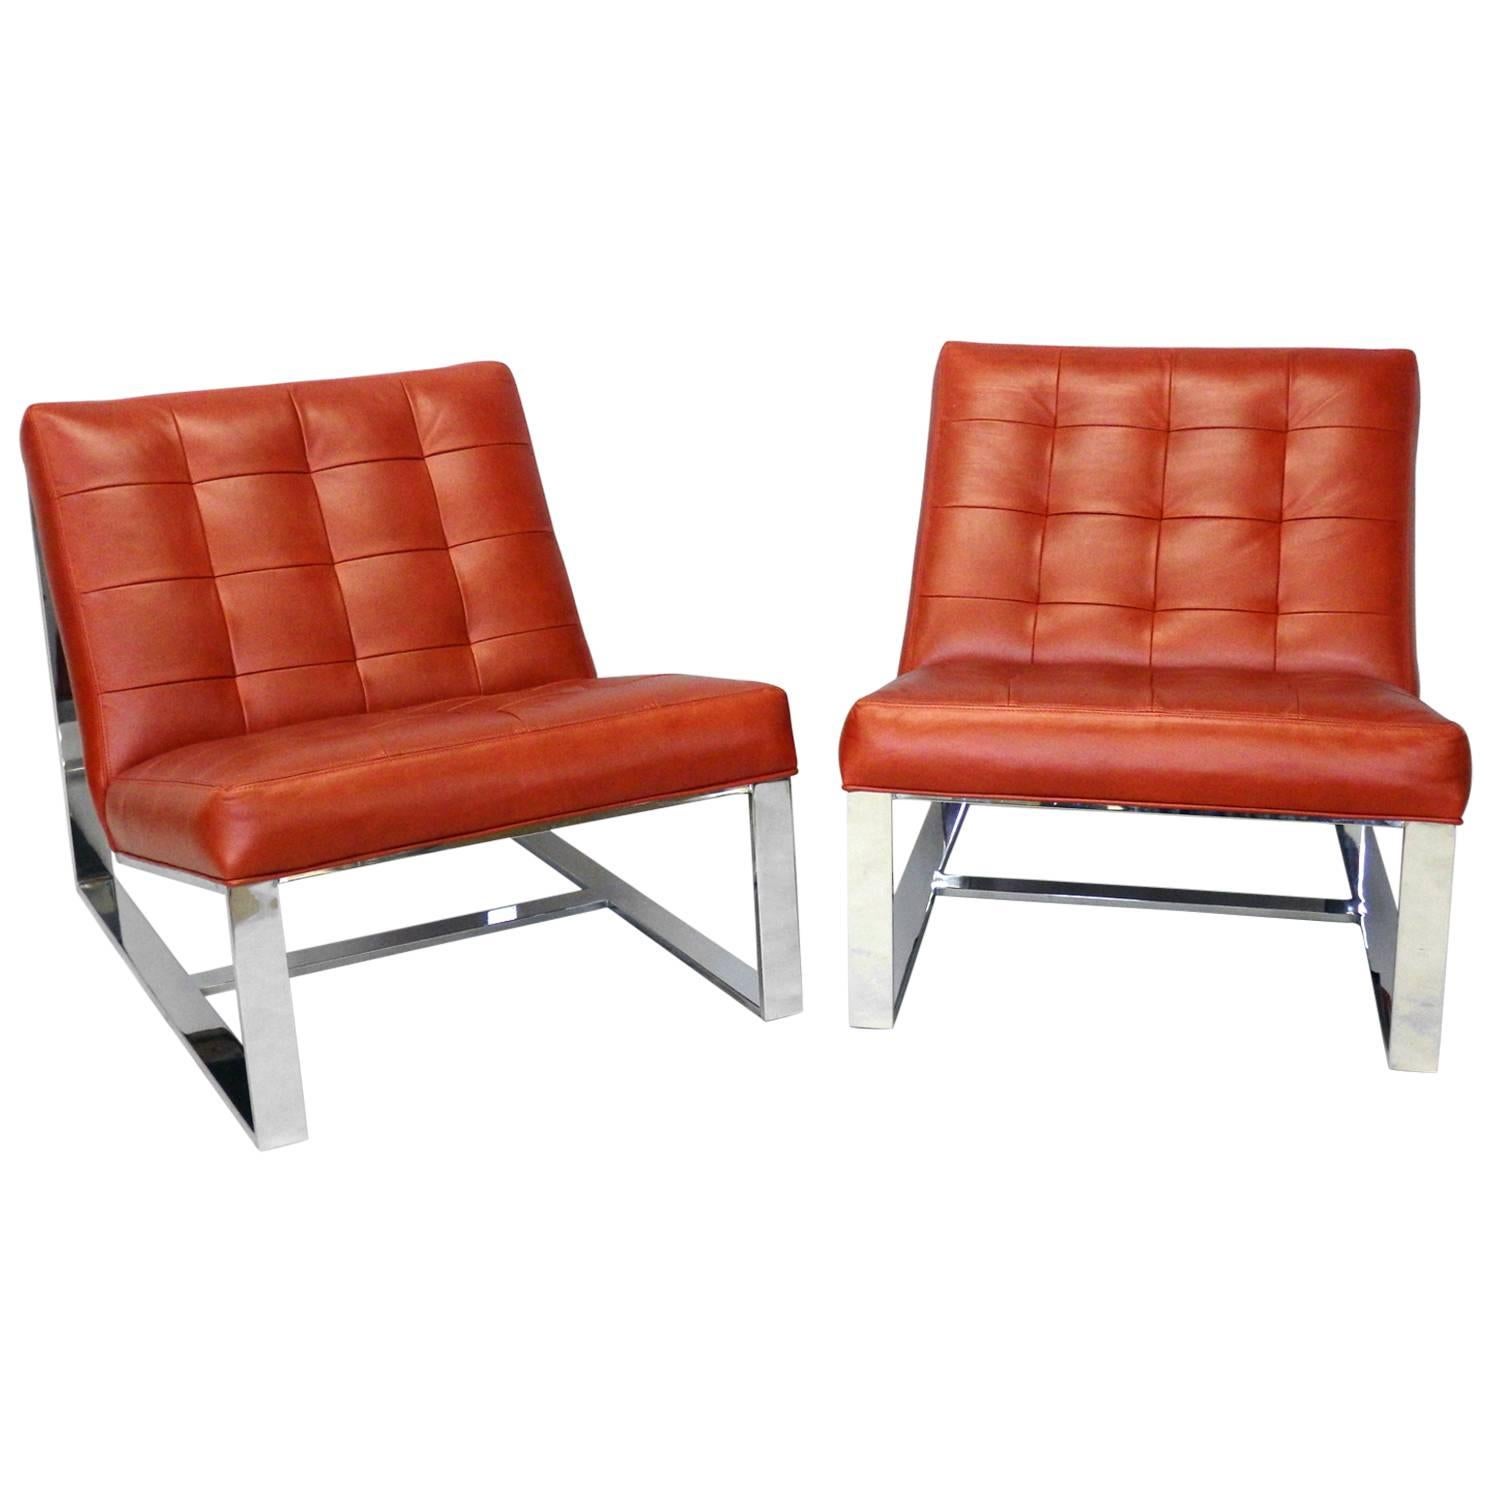 Pair of Milo Baughman Red Leather Armless Lounge Chairs